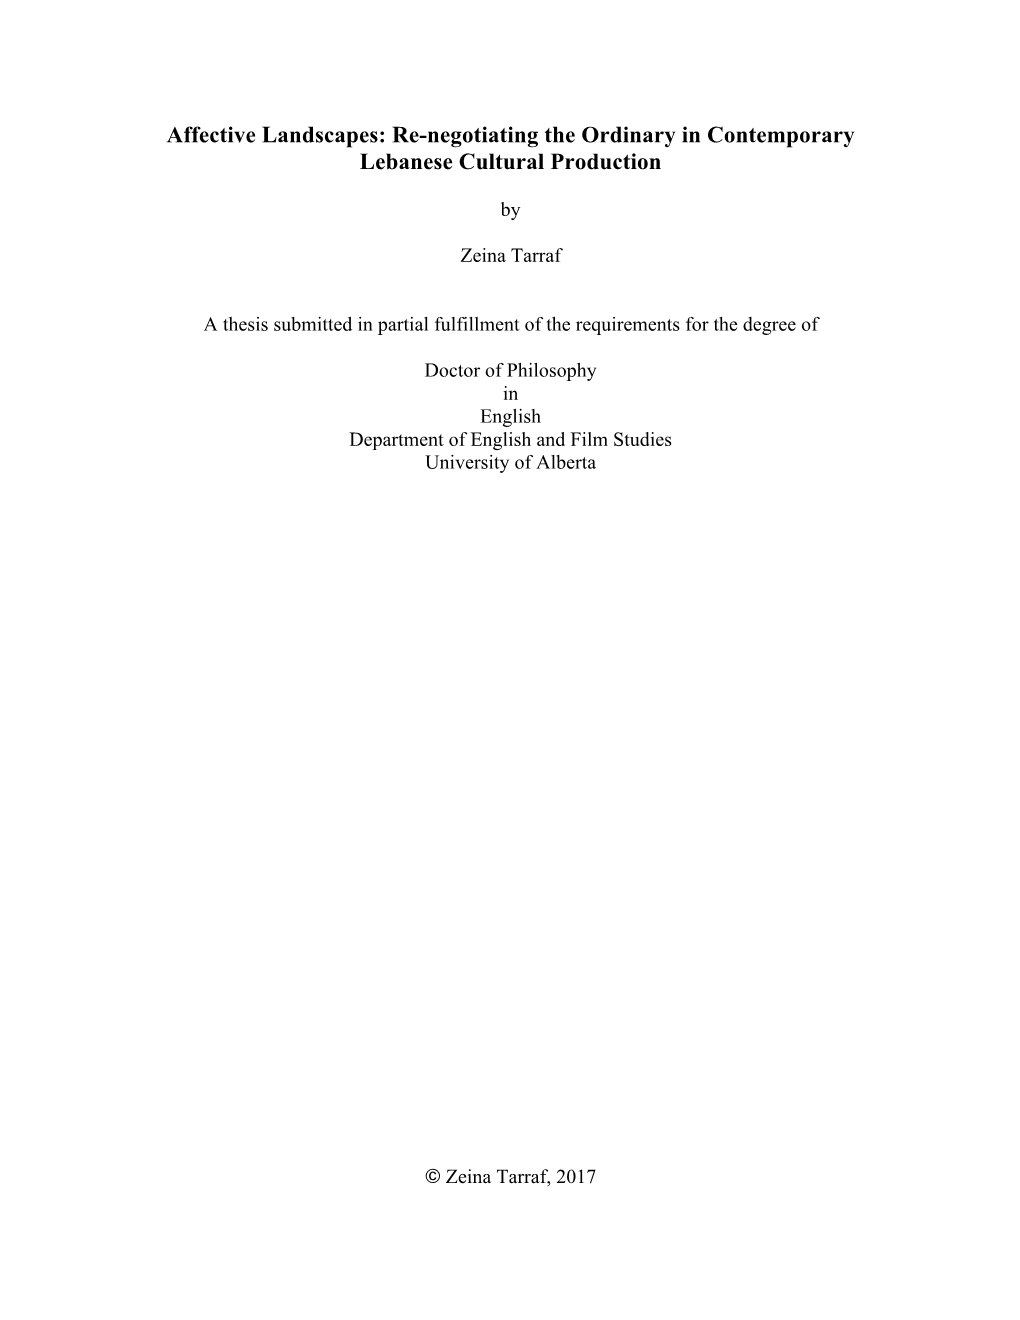 Affective Landscapes: Re-Negotiating the Ordinary in Contemporary Lebanese Cultural Production